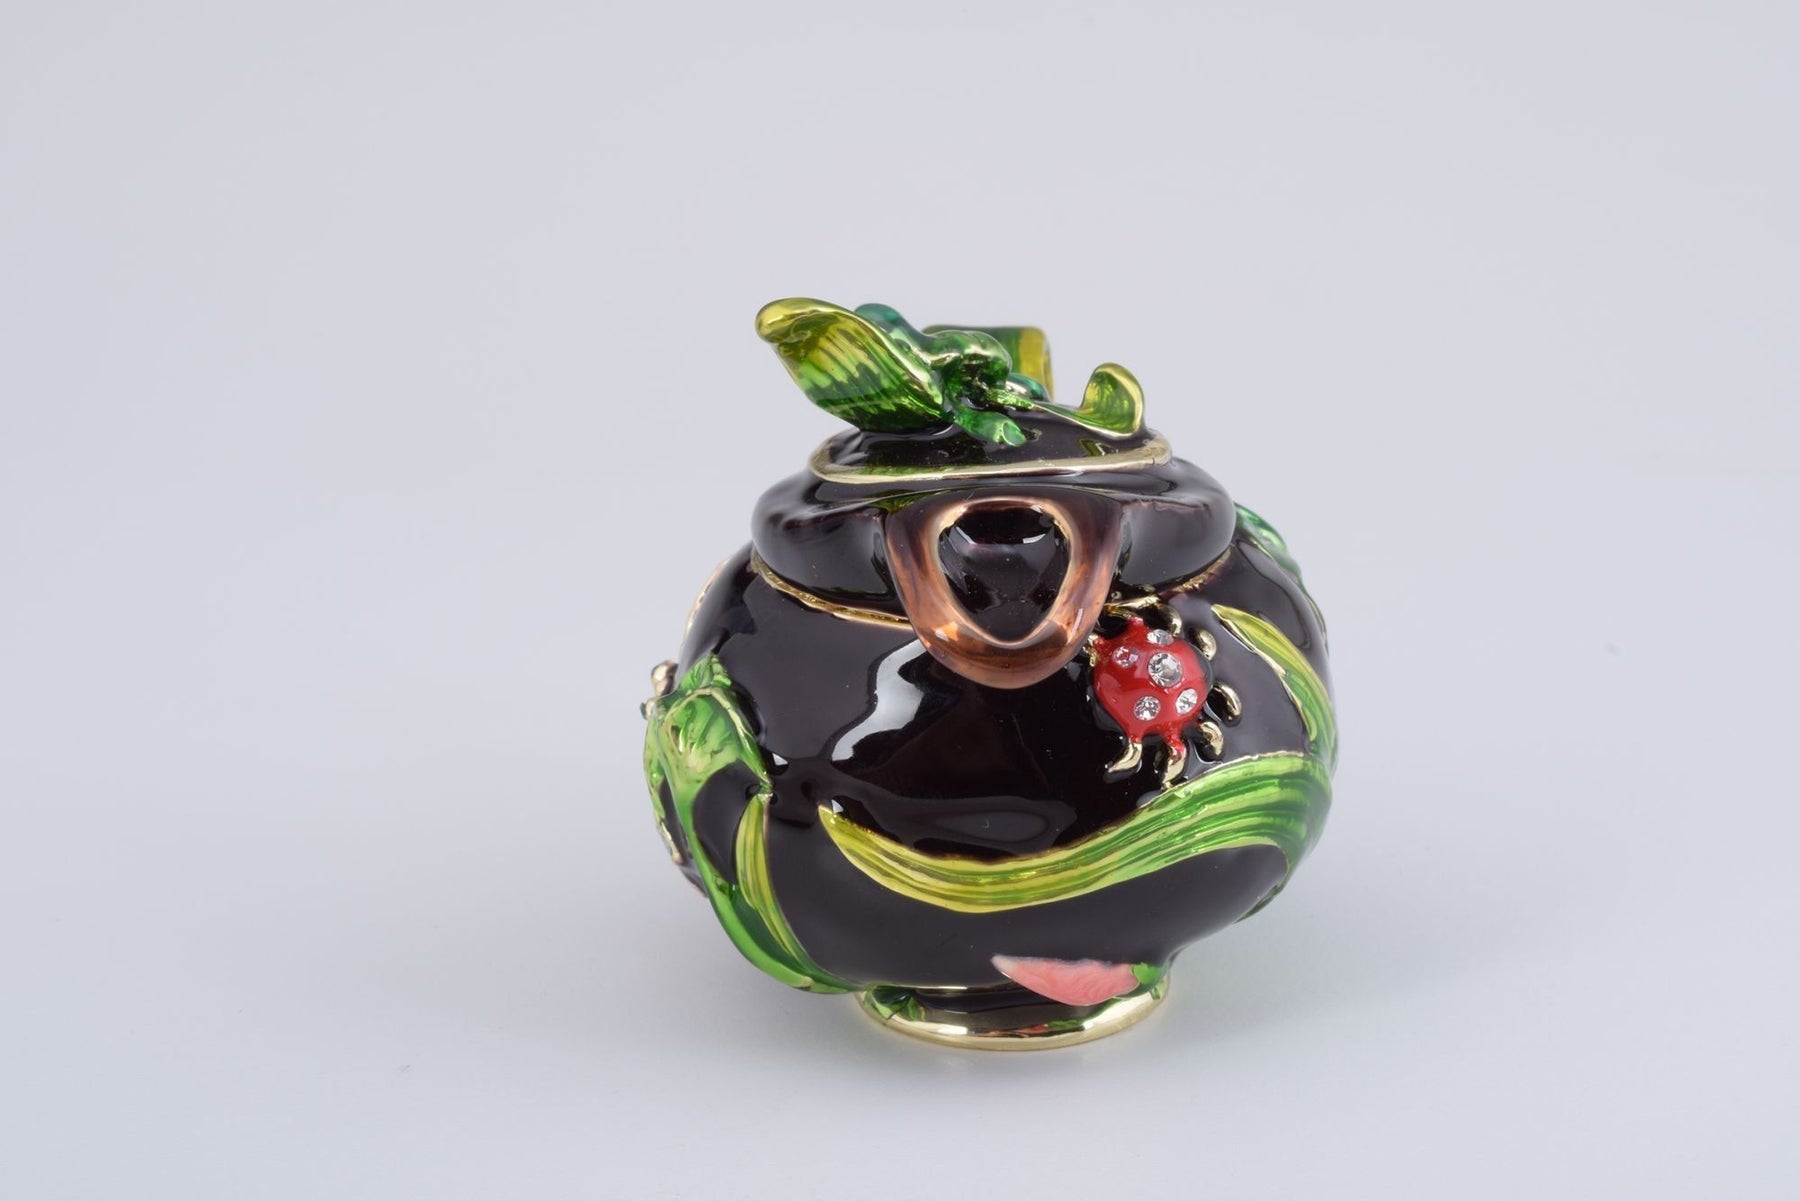 Teapot Decorated with a Ladybug and a Dragonfly  Keren Kopal